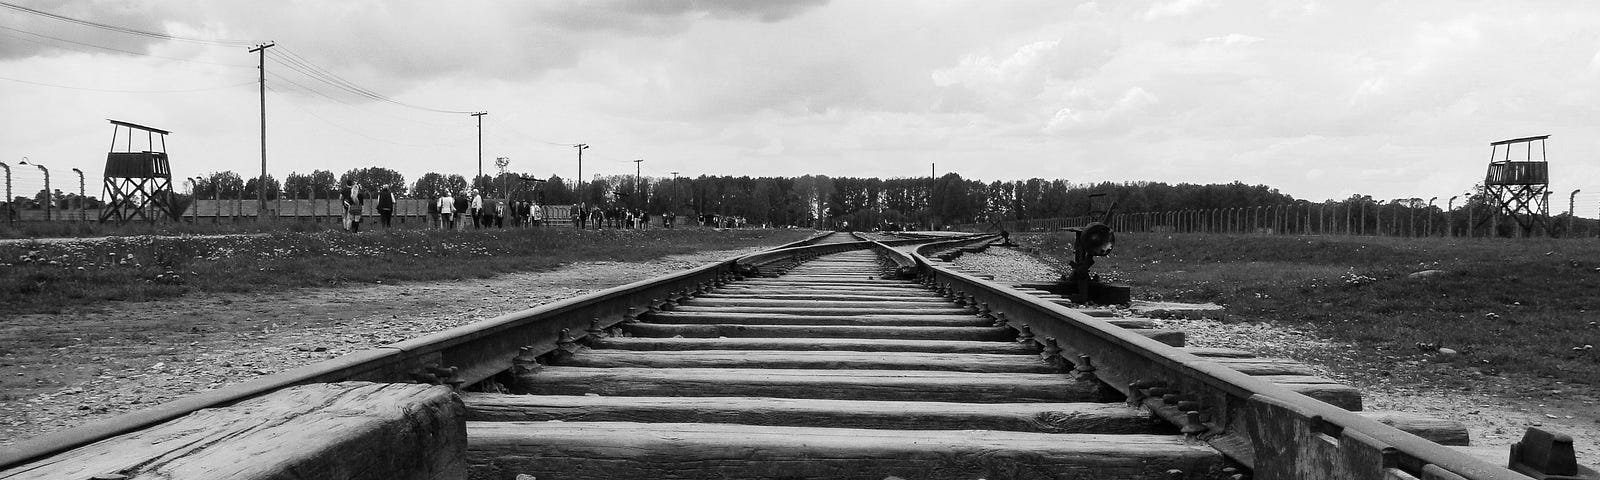 A black and white photo of the train tracks leading to a concentration camp.